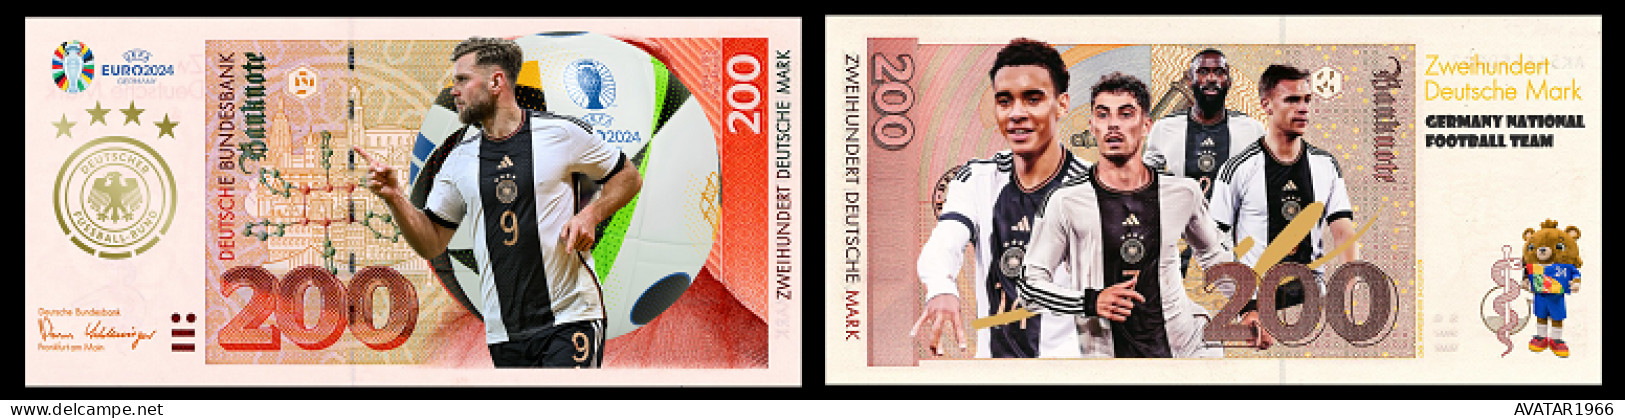 UEFA European Football Championship 2024 qualified country  Germany  8 pieces Germany fantasy paper money